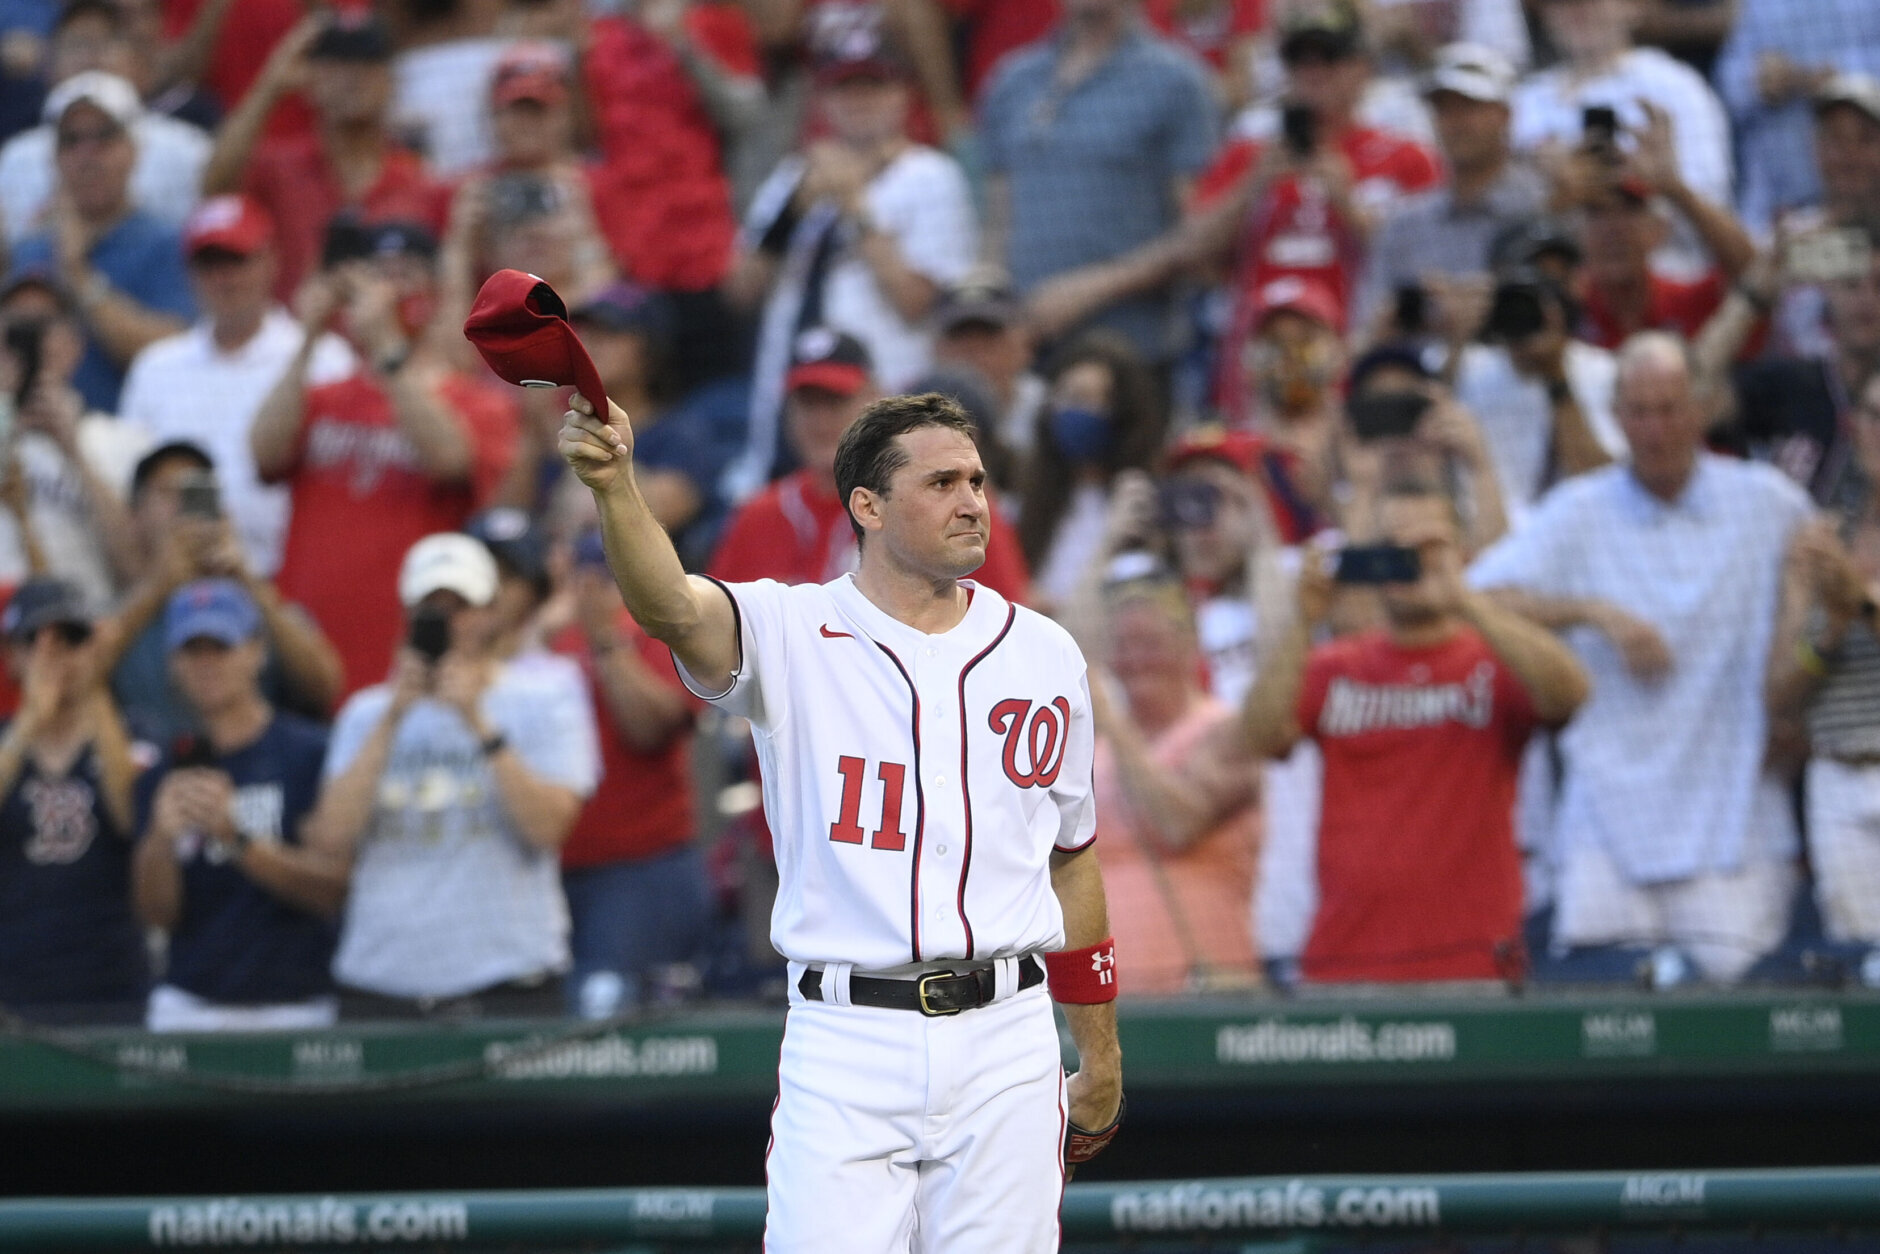 <p>Zimmerman had one final ride in him for 2021 after he opted out of the abbreviated 2020 season due to COVID-19. It was suspected that Zimmerman would hang it up by the end of 2021, and a tearful farewell at Nationals Park in their final home game seemed to indicate just that. Mr. National would make his retirement official on Tuesday, ending a storied career with the only franchise he ever knew.</p>
